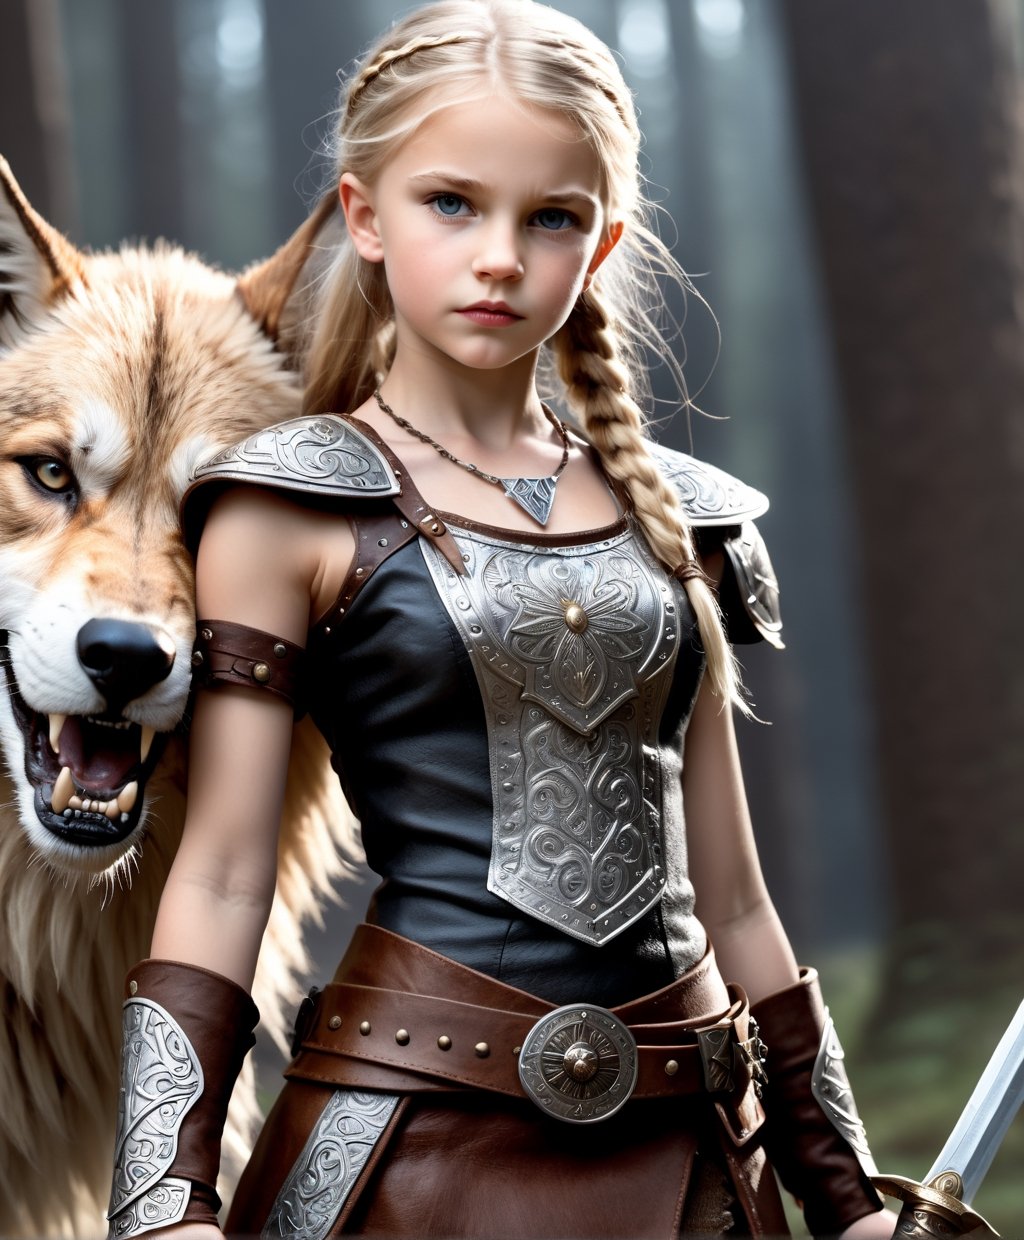 slim body, (masterpiece, best quality, highres:1.3), (1 girl:1.3), extremely realistic human face, full body, Viking dress, 10-year old little girl with dagger, stern look, fantasy setting, ferocious wolf, blonde hair,steampunk style,photorealistic